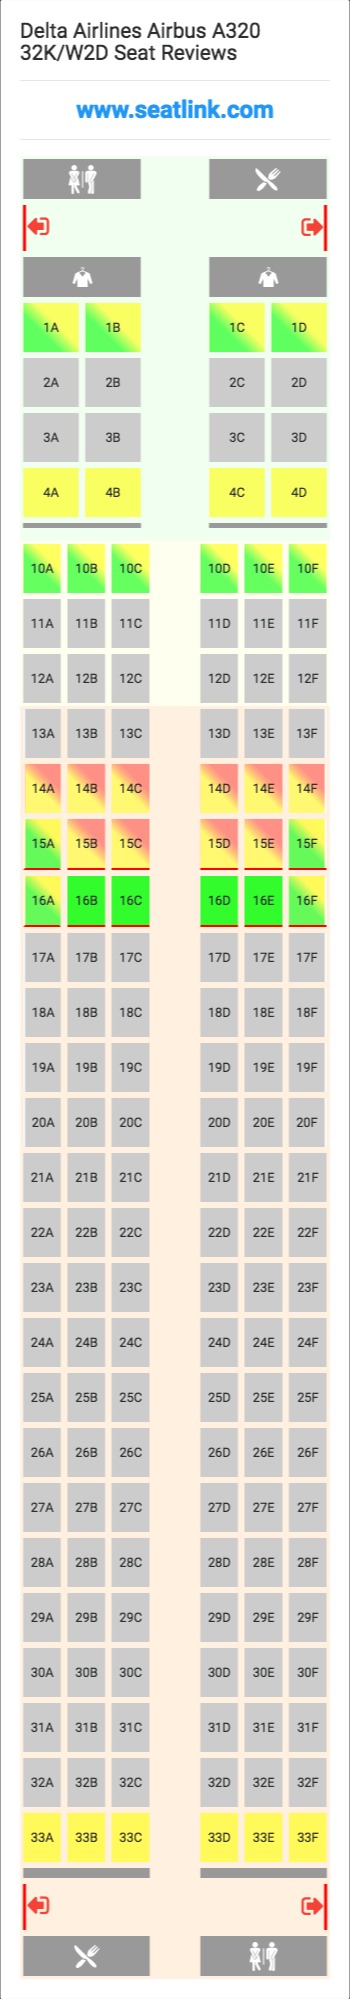 Delta Airlines Airbus A320 32K/W2D (320) Seat Map